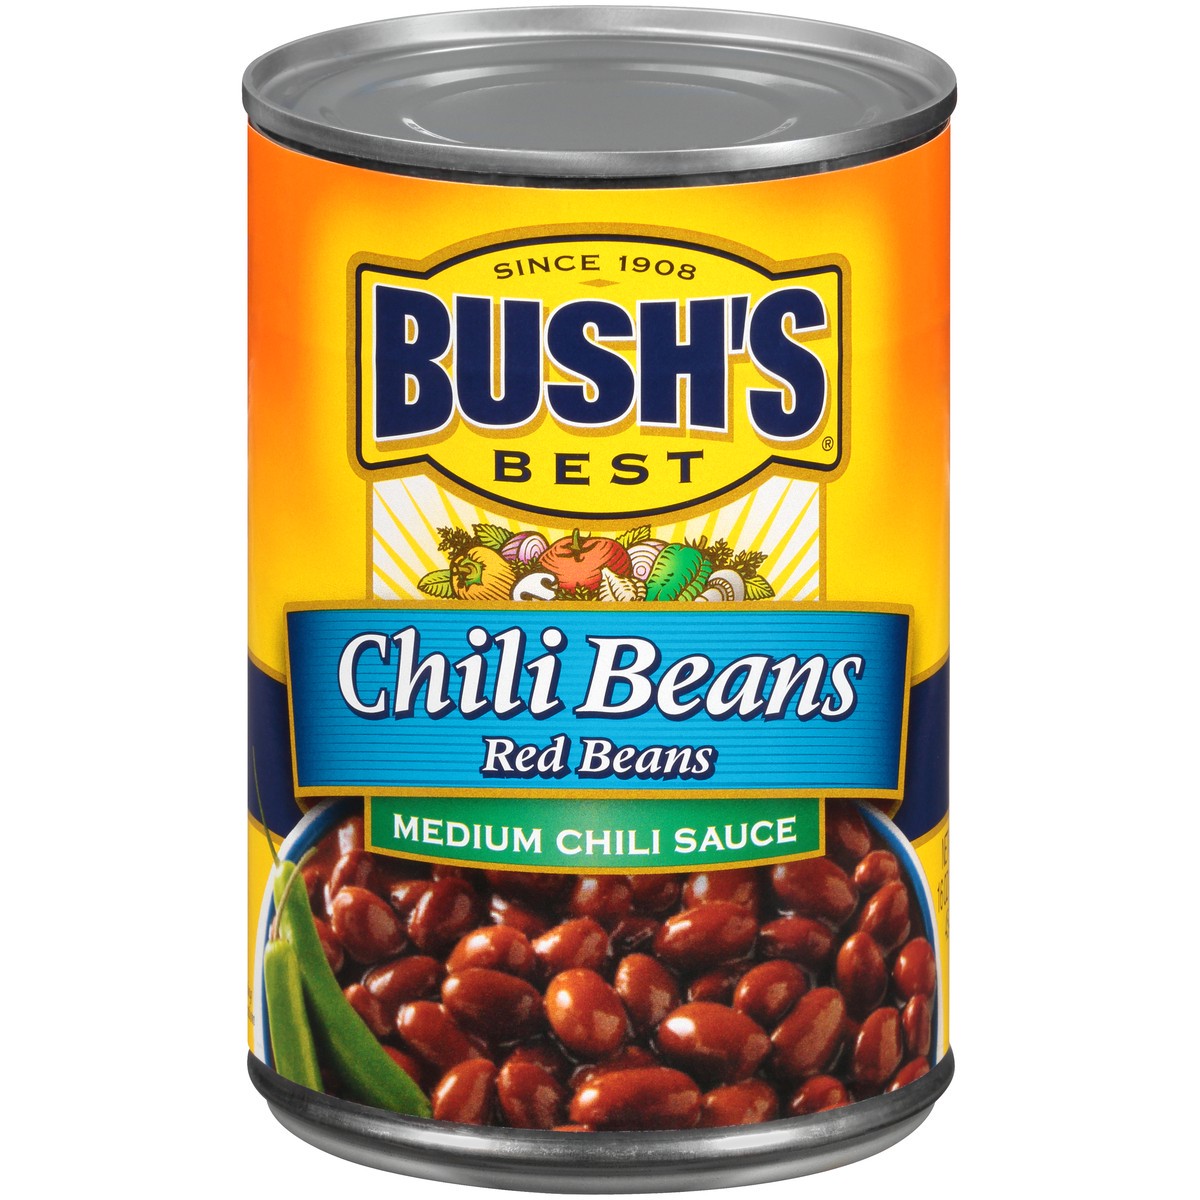 slide 1 of 5, Bush's Best Chili Beans Red Beans in a Medium Chili Sauce 16 oz. Can, 16 oz